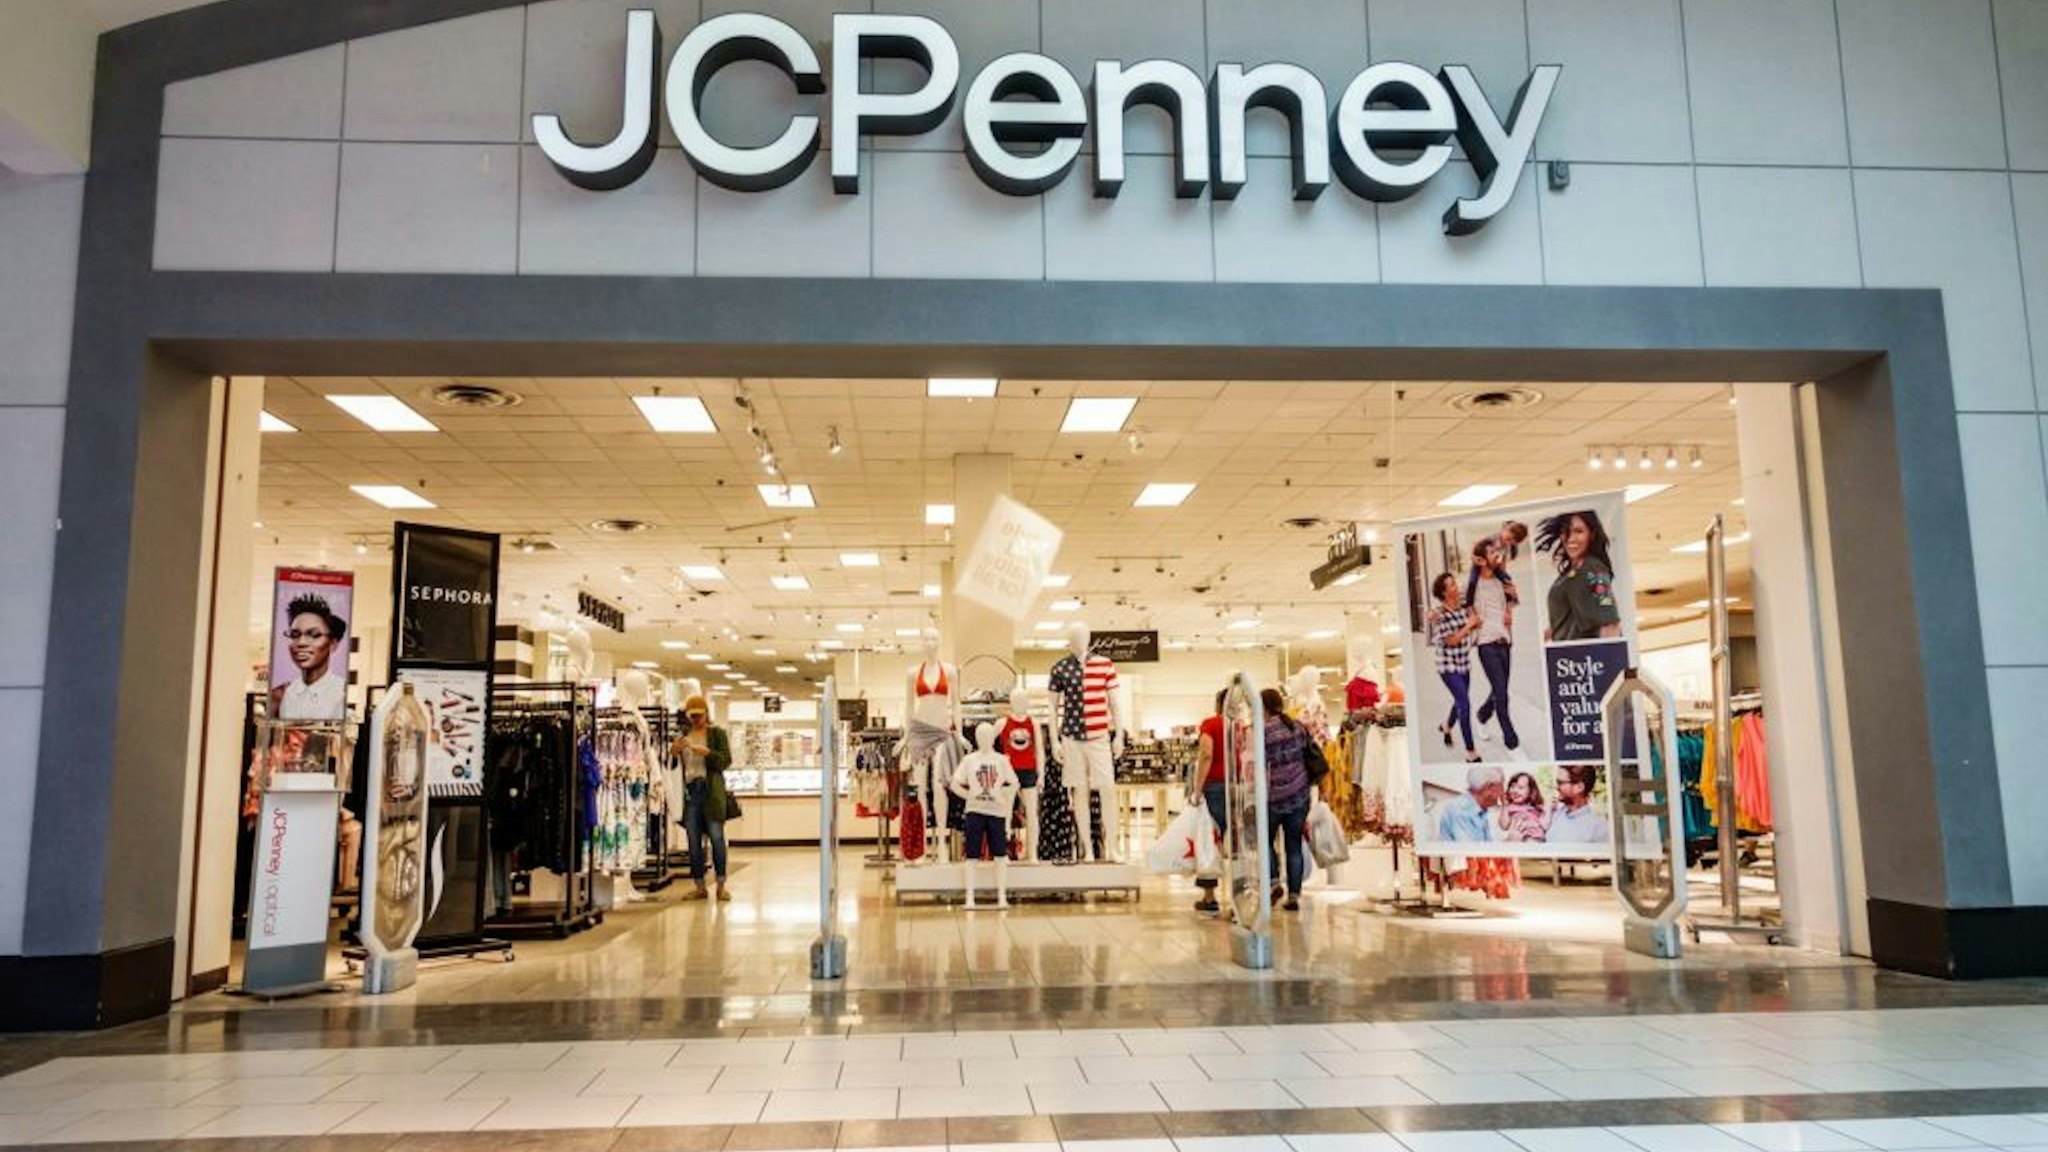 Miami, JC Penny Department Store, front entrance.